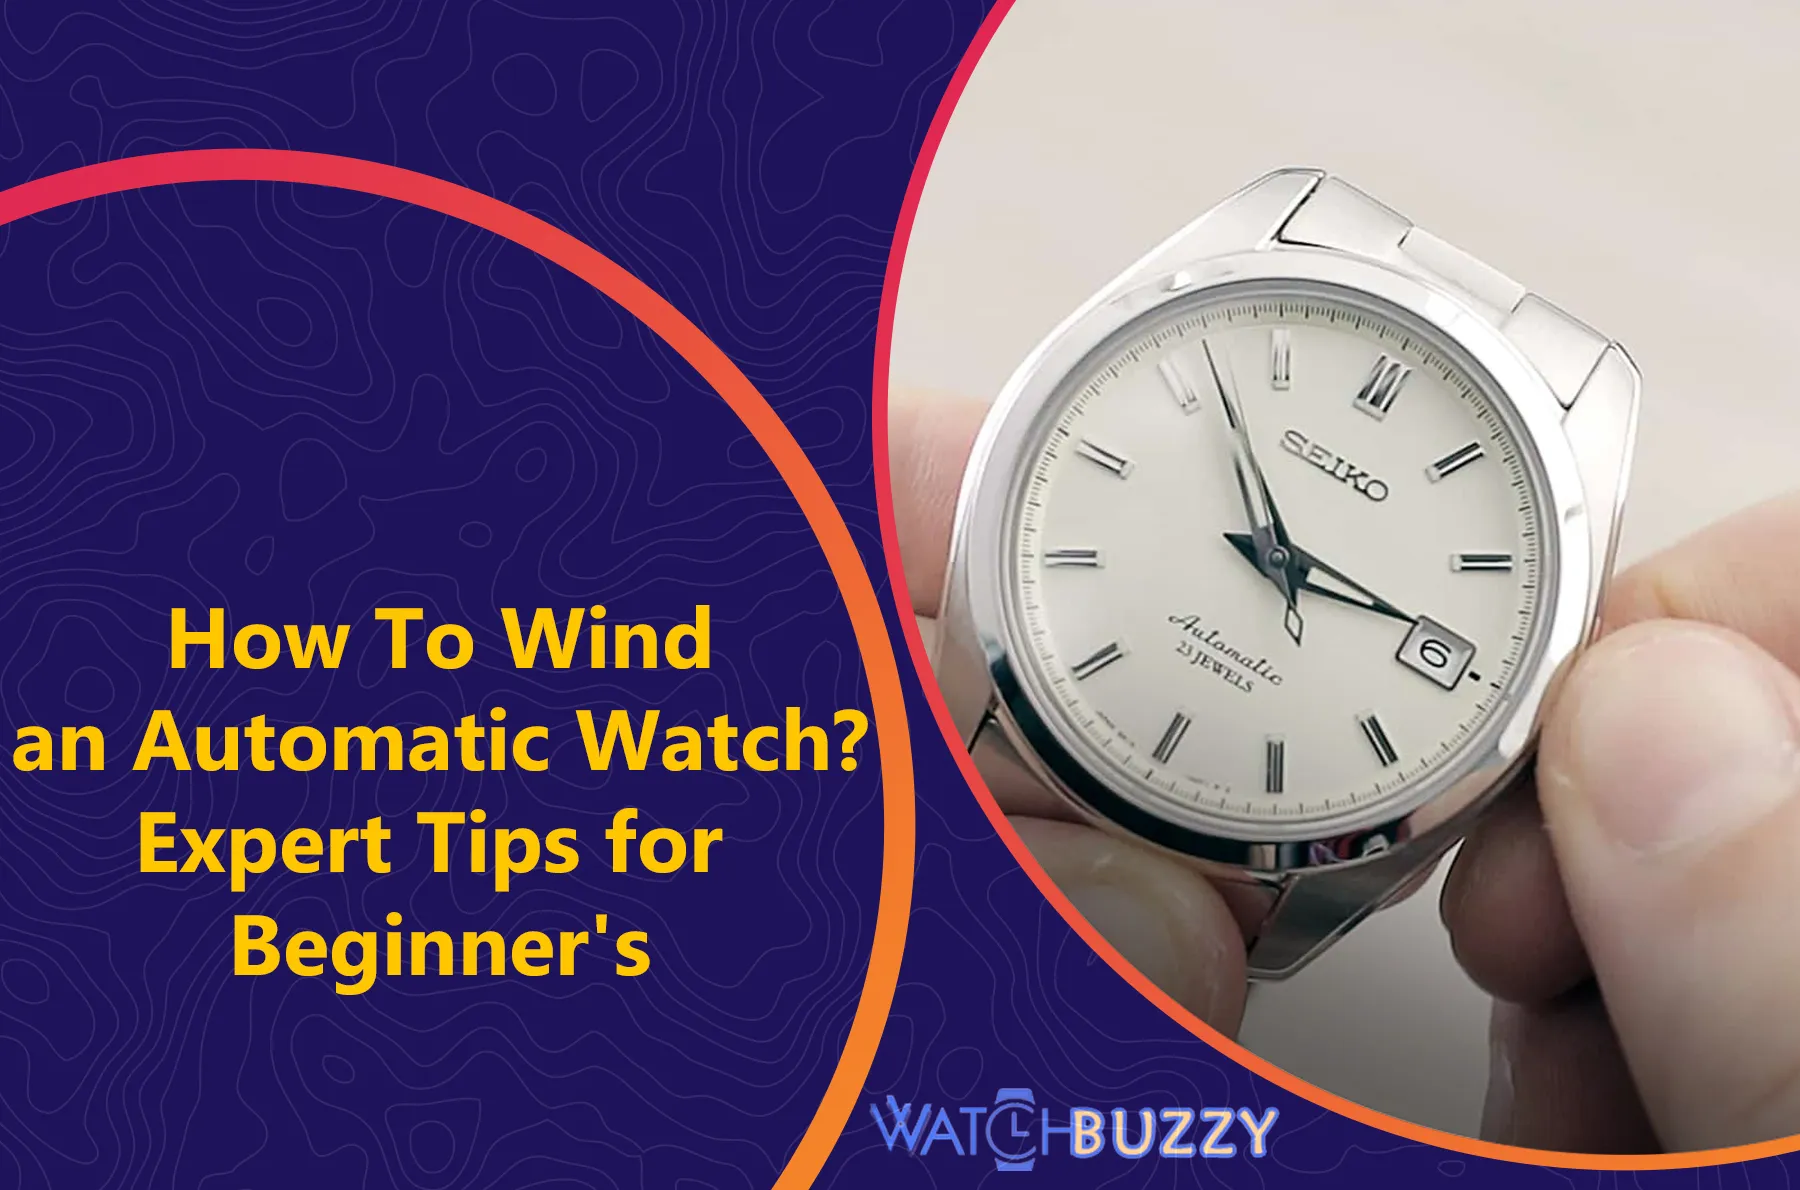 How To Wind an Automatic Watch? Expert Tips for Beginner's